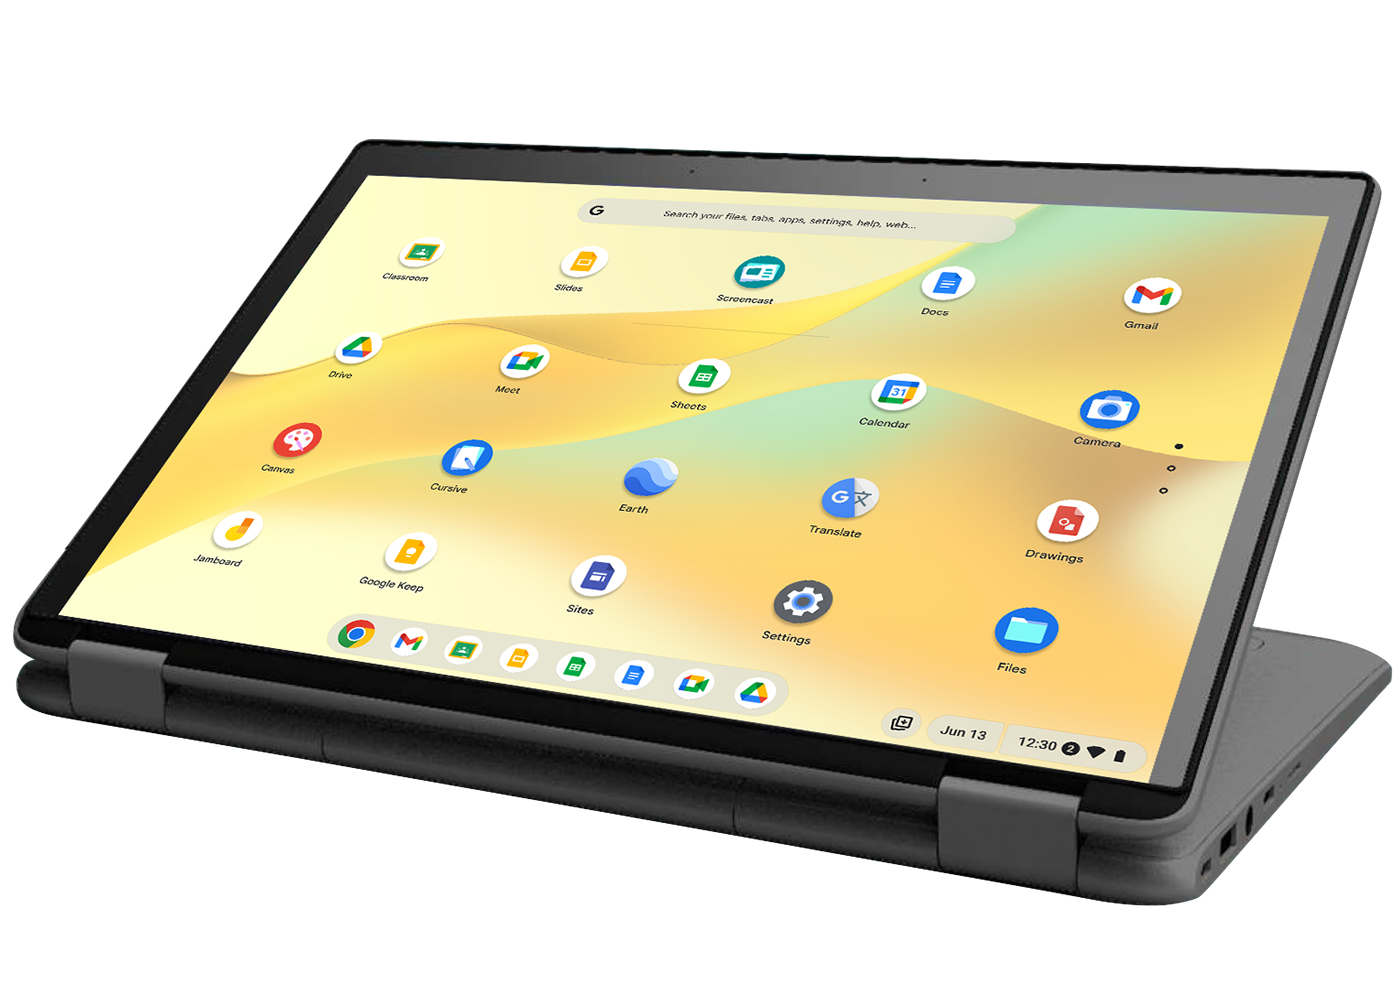 Chromebook device in tablet mode